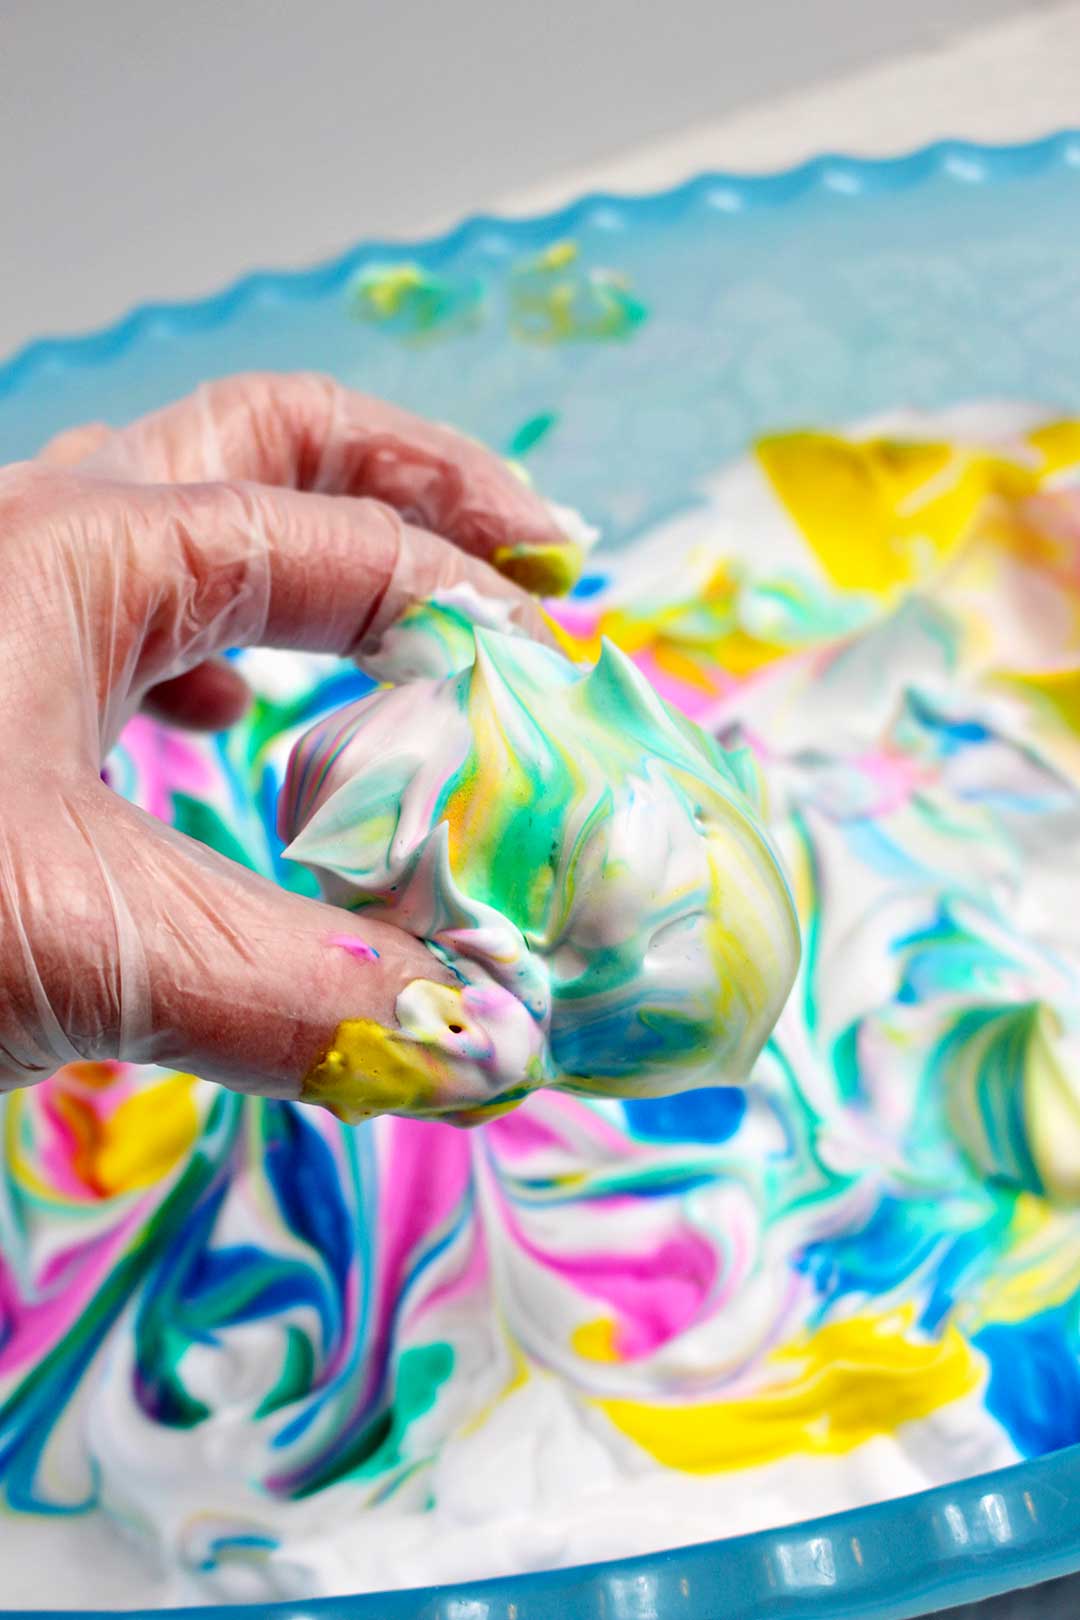 An egg covered in yellow, green, blue, and pink swirled shaving cream.